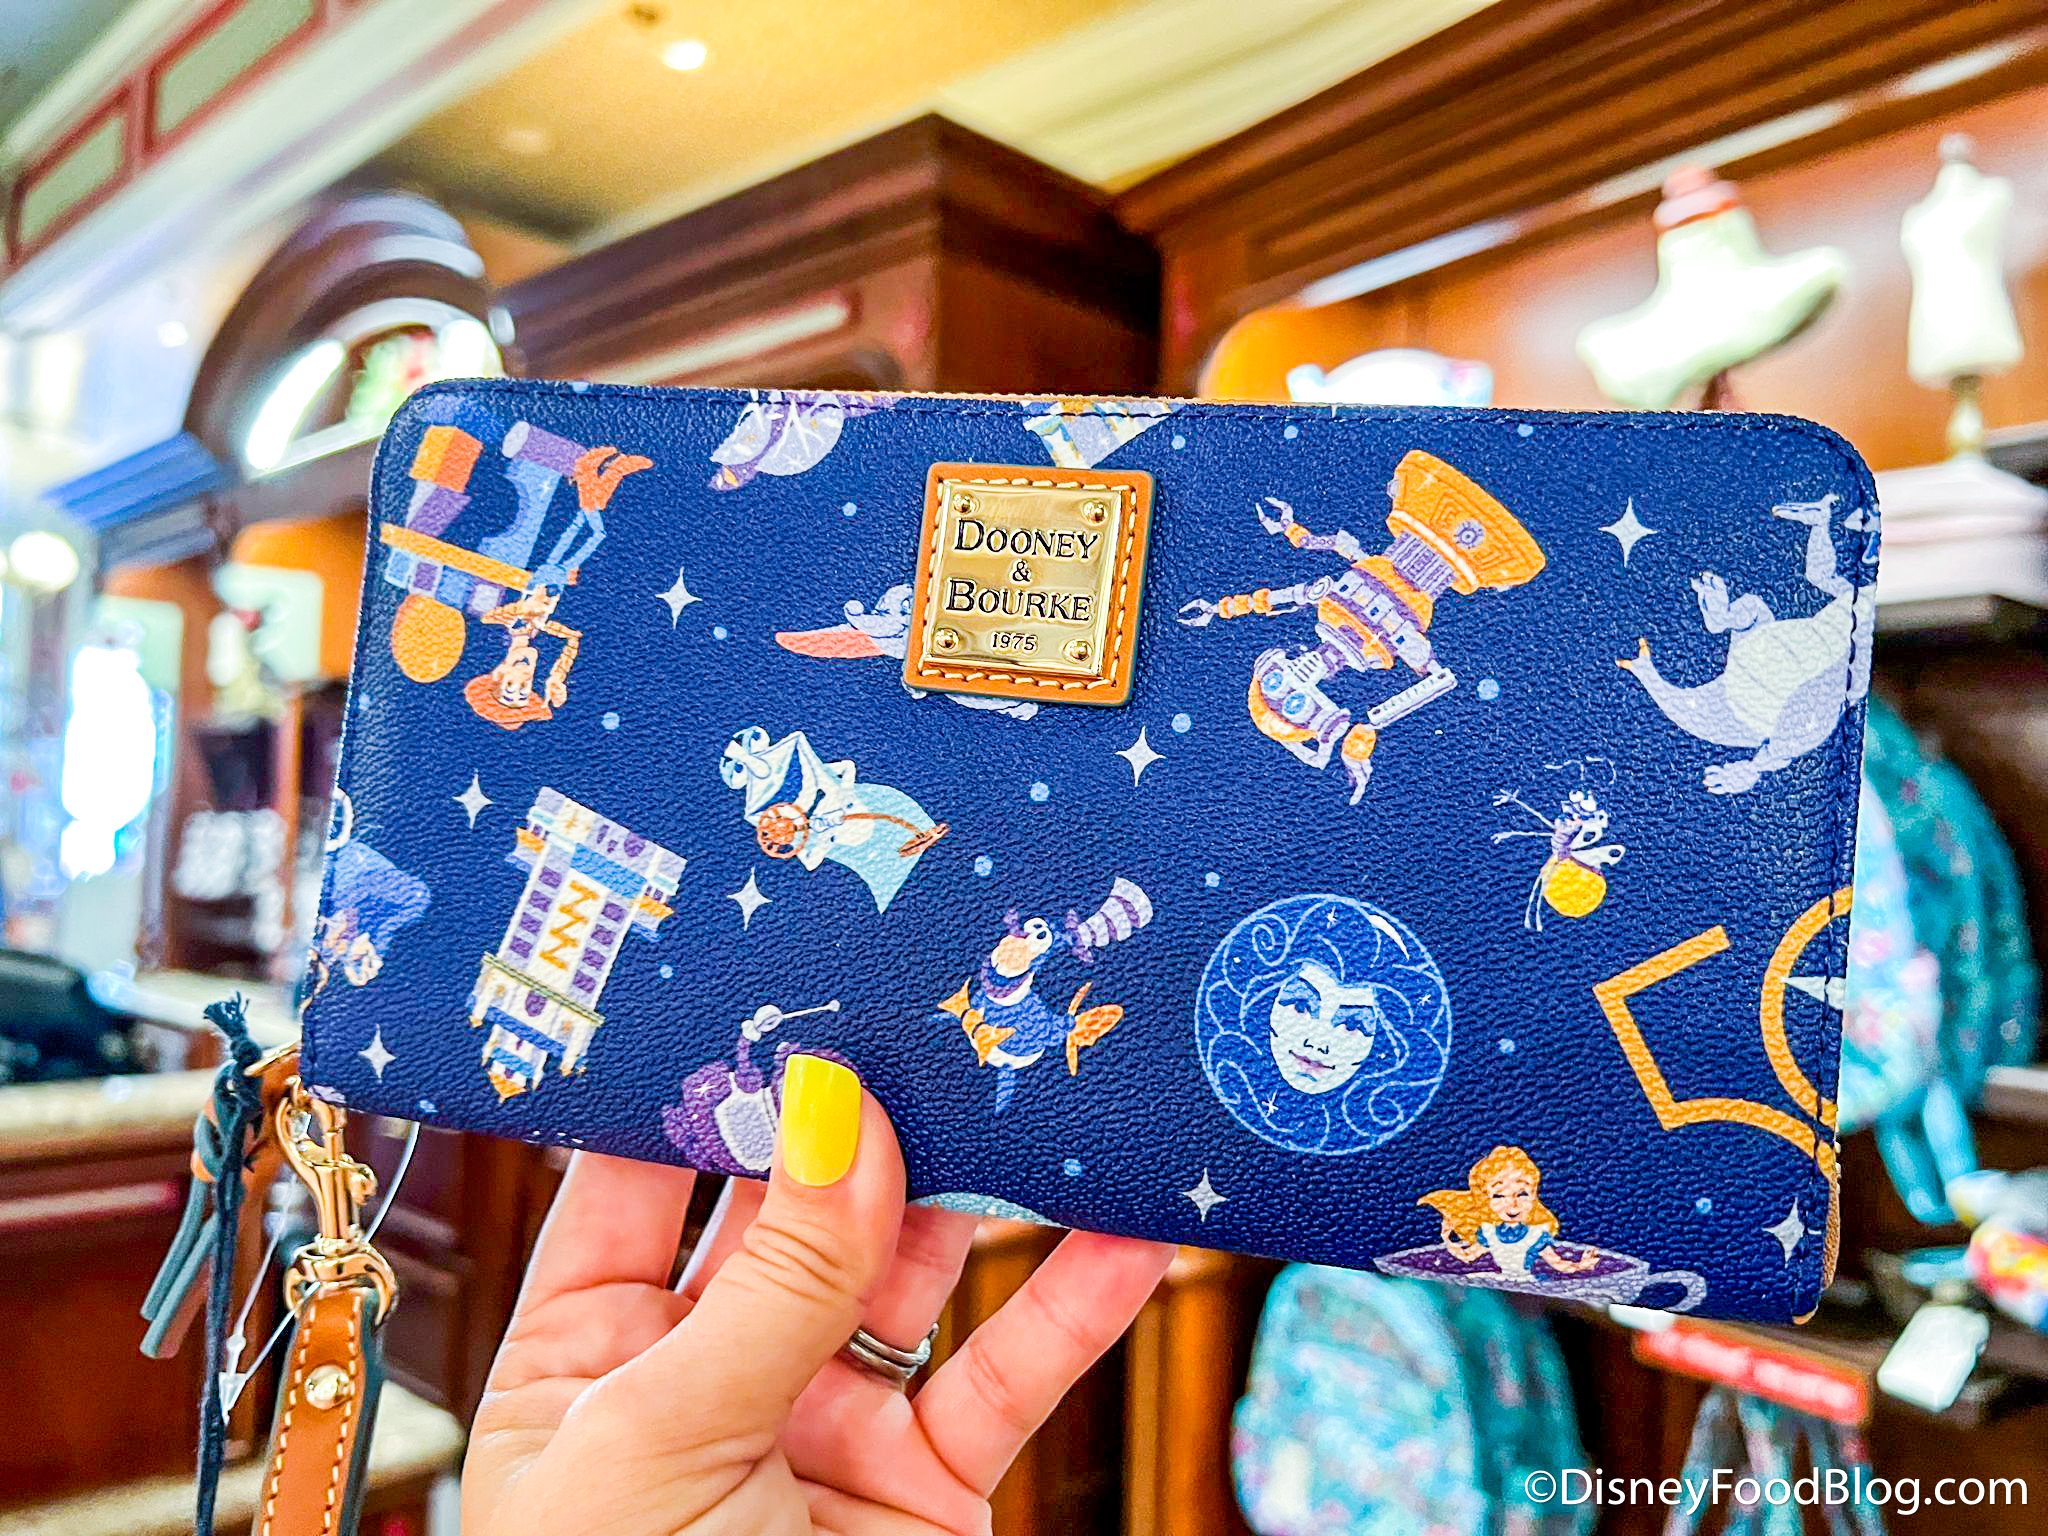 NEW 50th Anniversary Dooney & Bourke Bags Available NOW in Disney